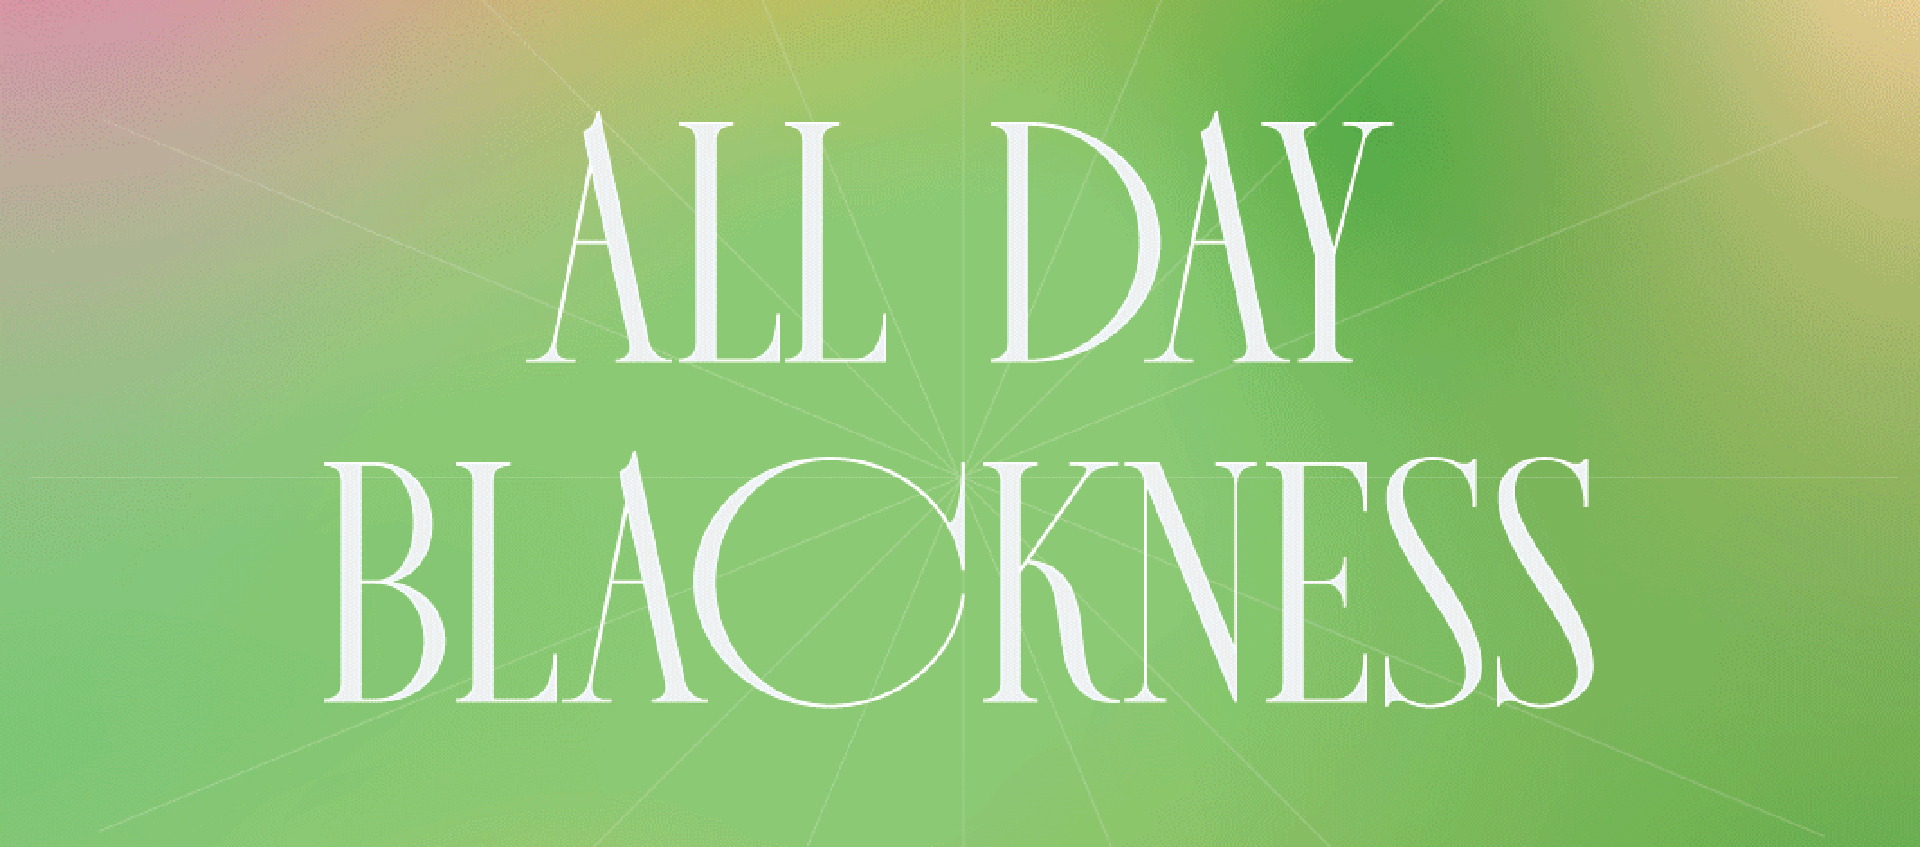 The words “ALL DAY BLACKNESS” in large, white text on top of a green background with pink and orange emanating from the top corners. Behind the text are faint white lines pointing outward from the center.